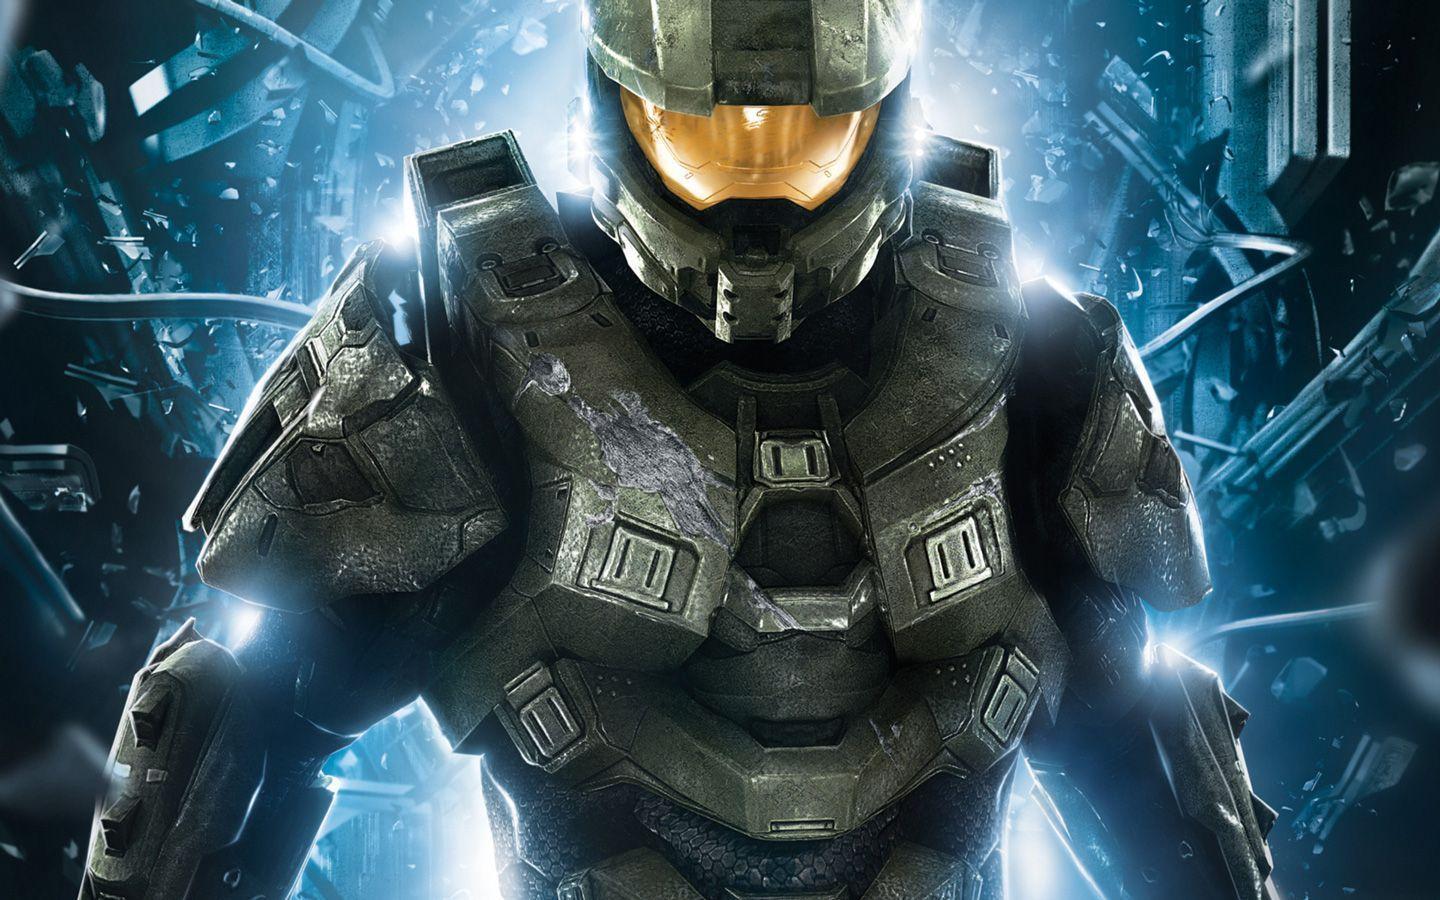 Free Halo 4 Wallpaper In 1440x900